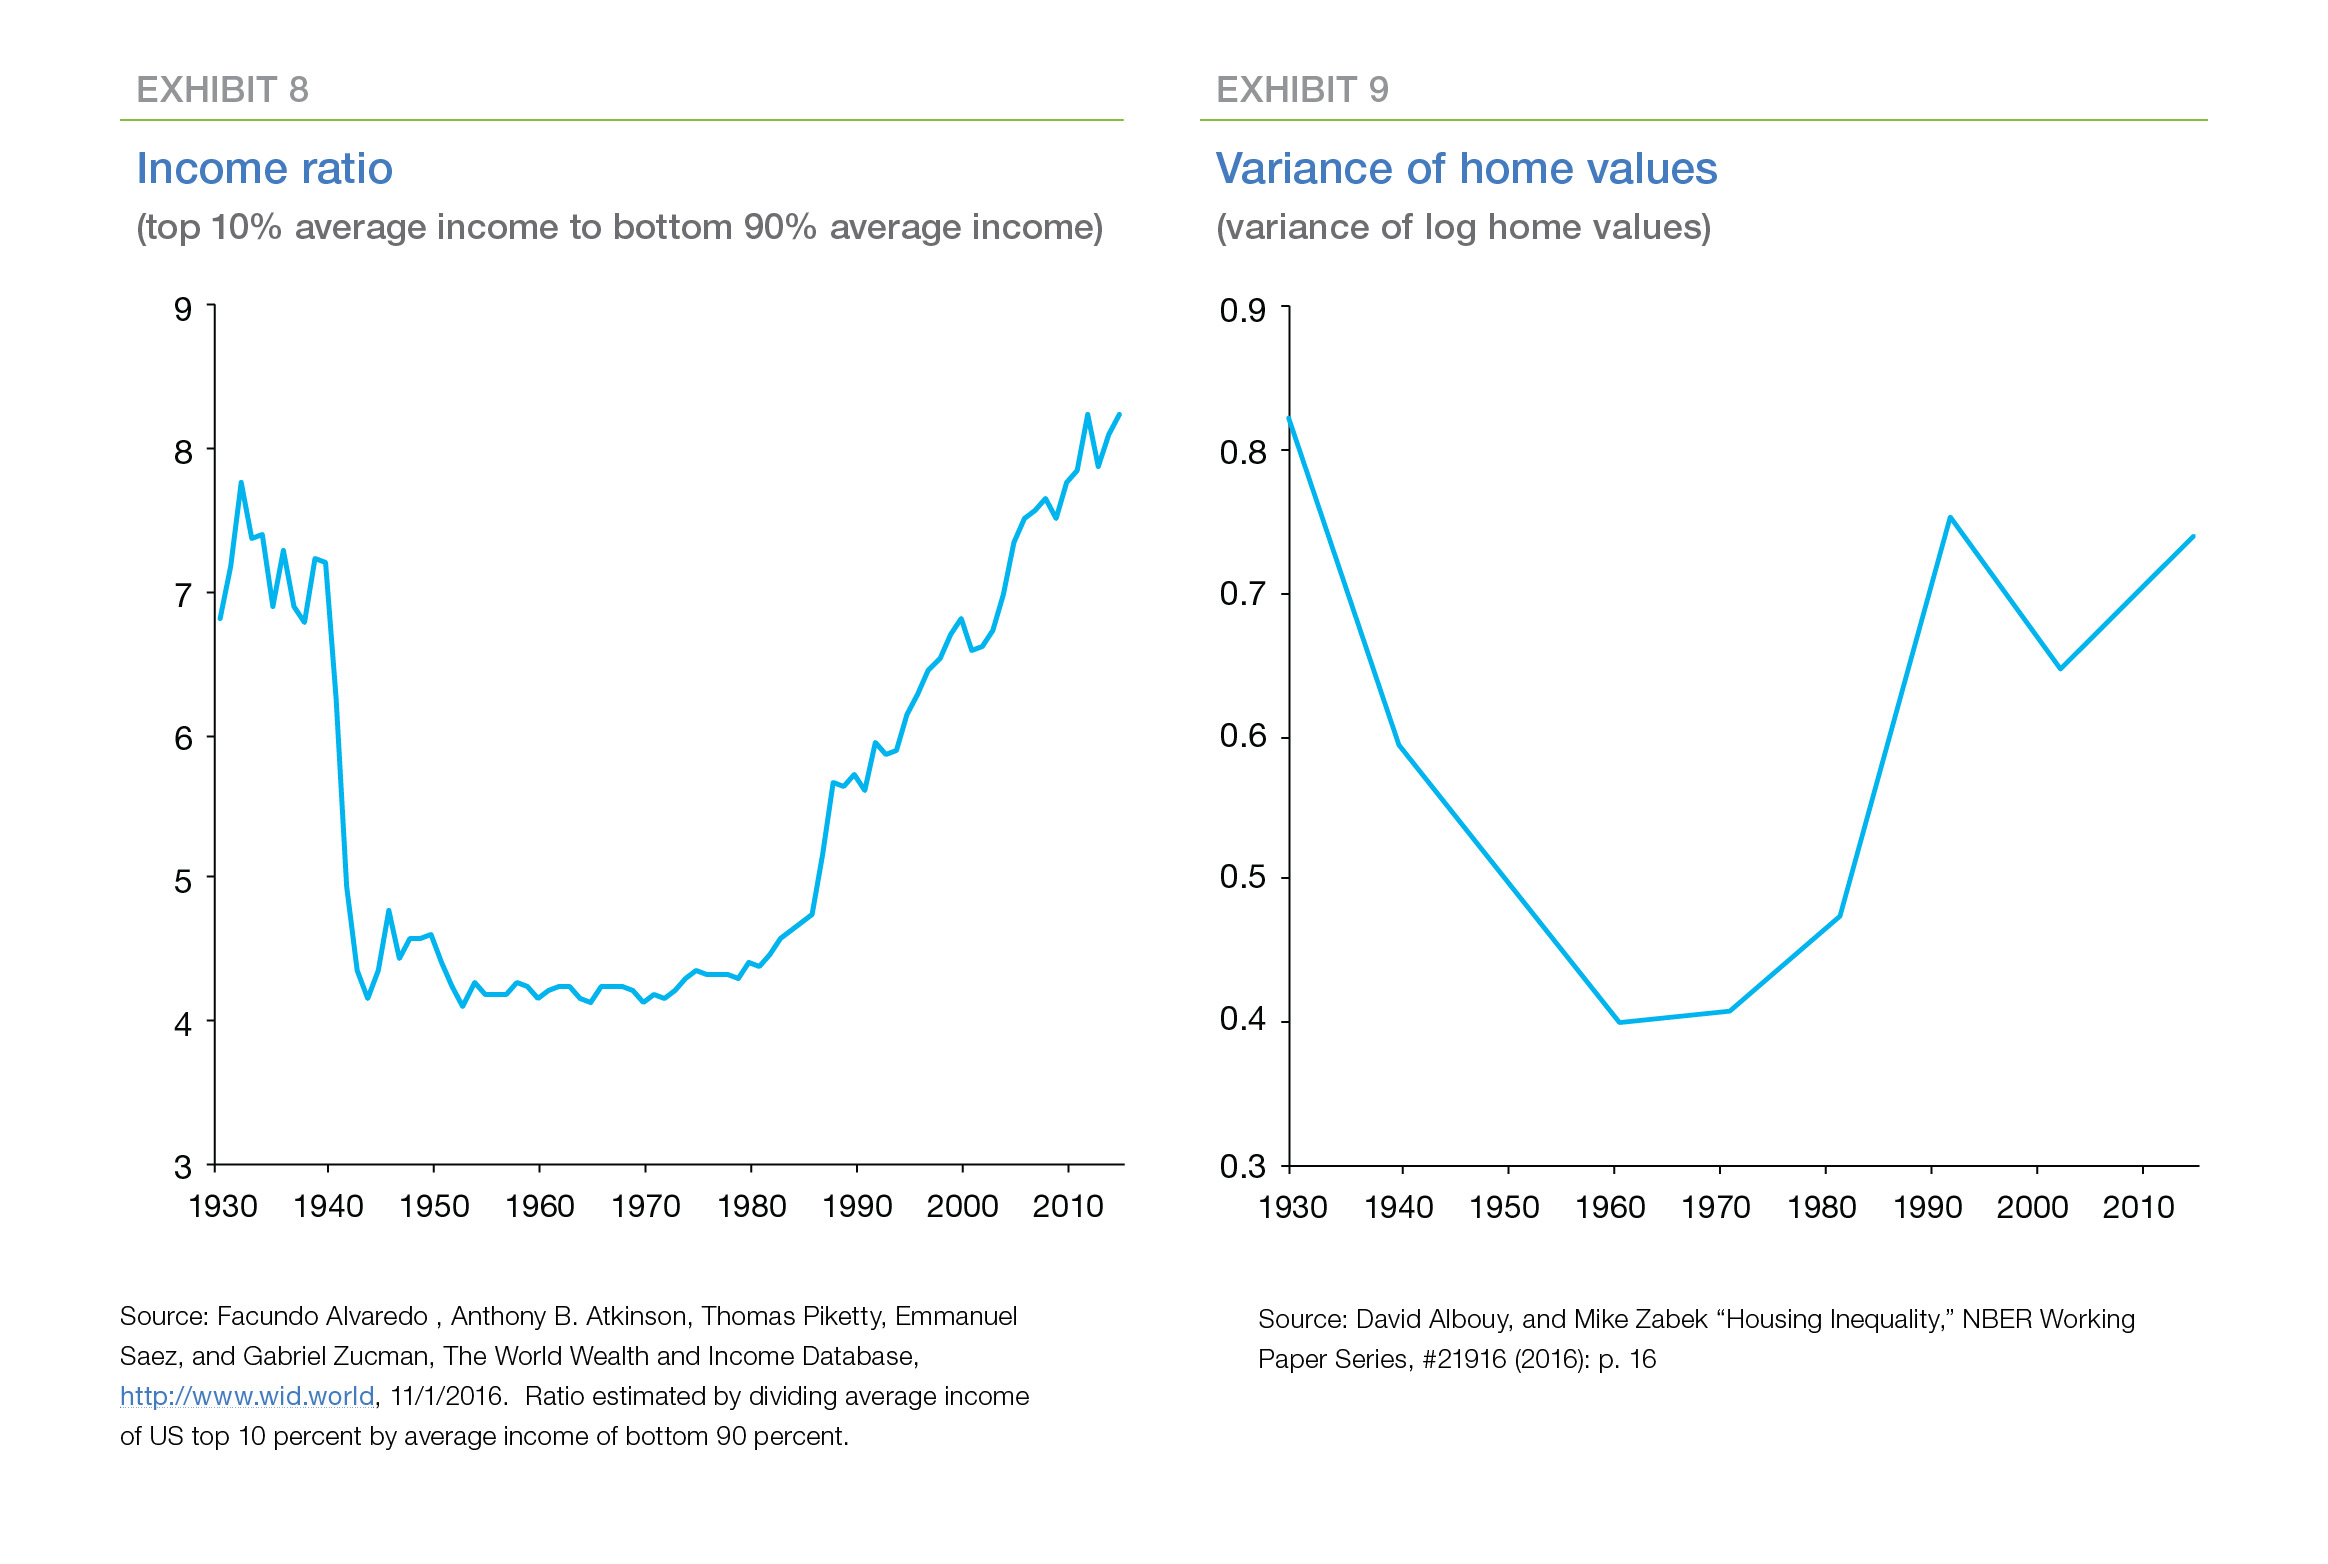 Line graph showing the income ratio and variance of home values from 1930 to 2010